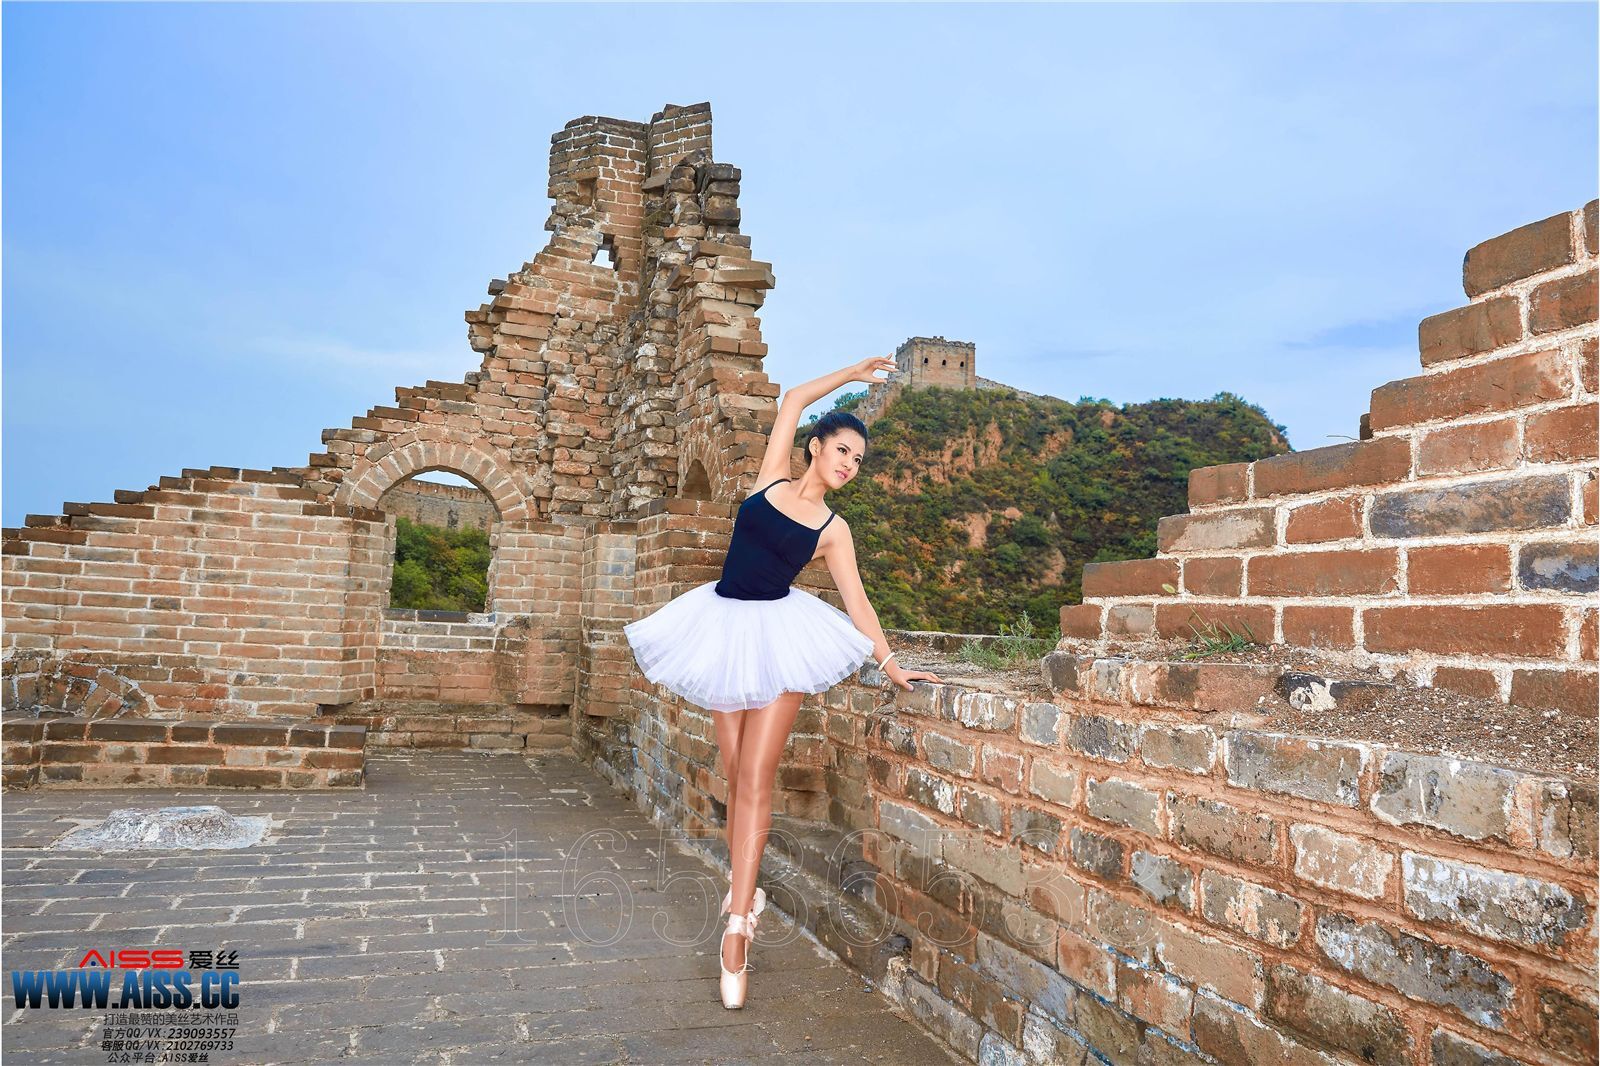 AISs No. 6016 [top of the Great Wall, dance of silk stockings]